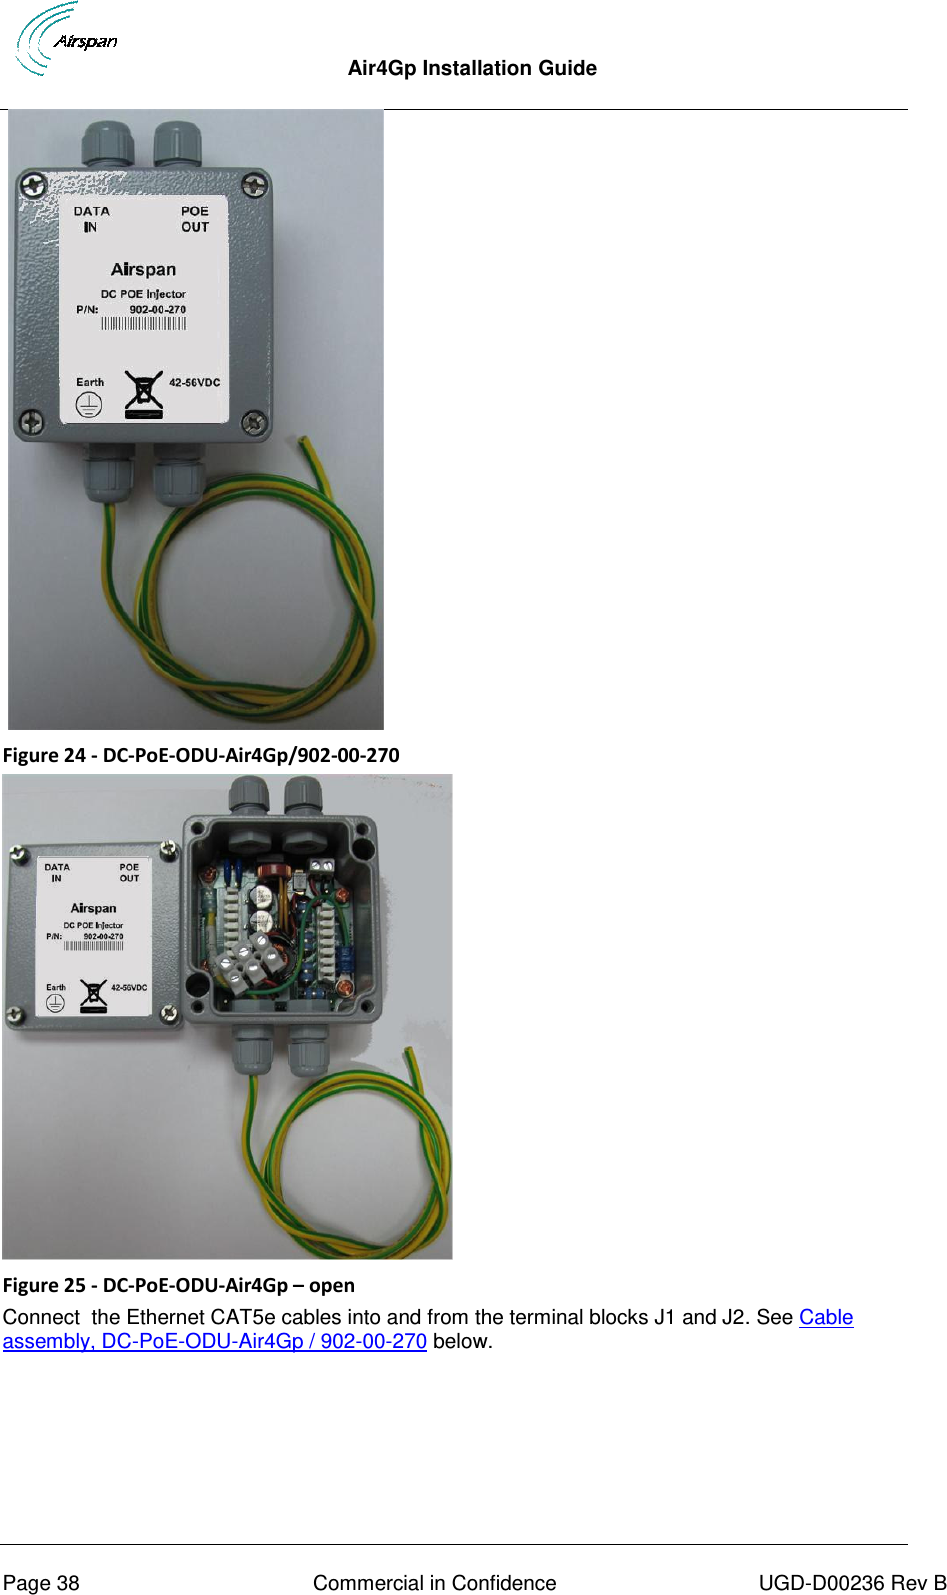  Air4Gp Installation Guide     Page 38  Commercial in Confidence  UGD-D00236 Rev B    Figure 24 - DC-PoE-ODU-Air4Gp/902-00-270  Figure 25 - DC-PoE-ODU-Air4Gp – open Connect  the Ethernet CAT5e cables into and from the terminal blocks J1 and J2. See Cable assembly, DC-PoE-ODU-Air4Gp / 902-00-270 below. 